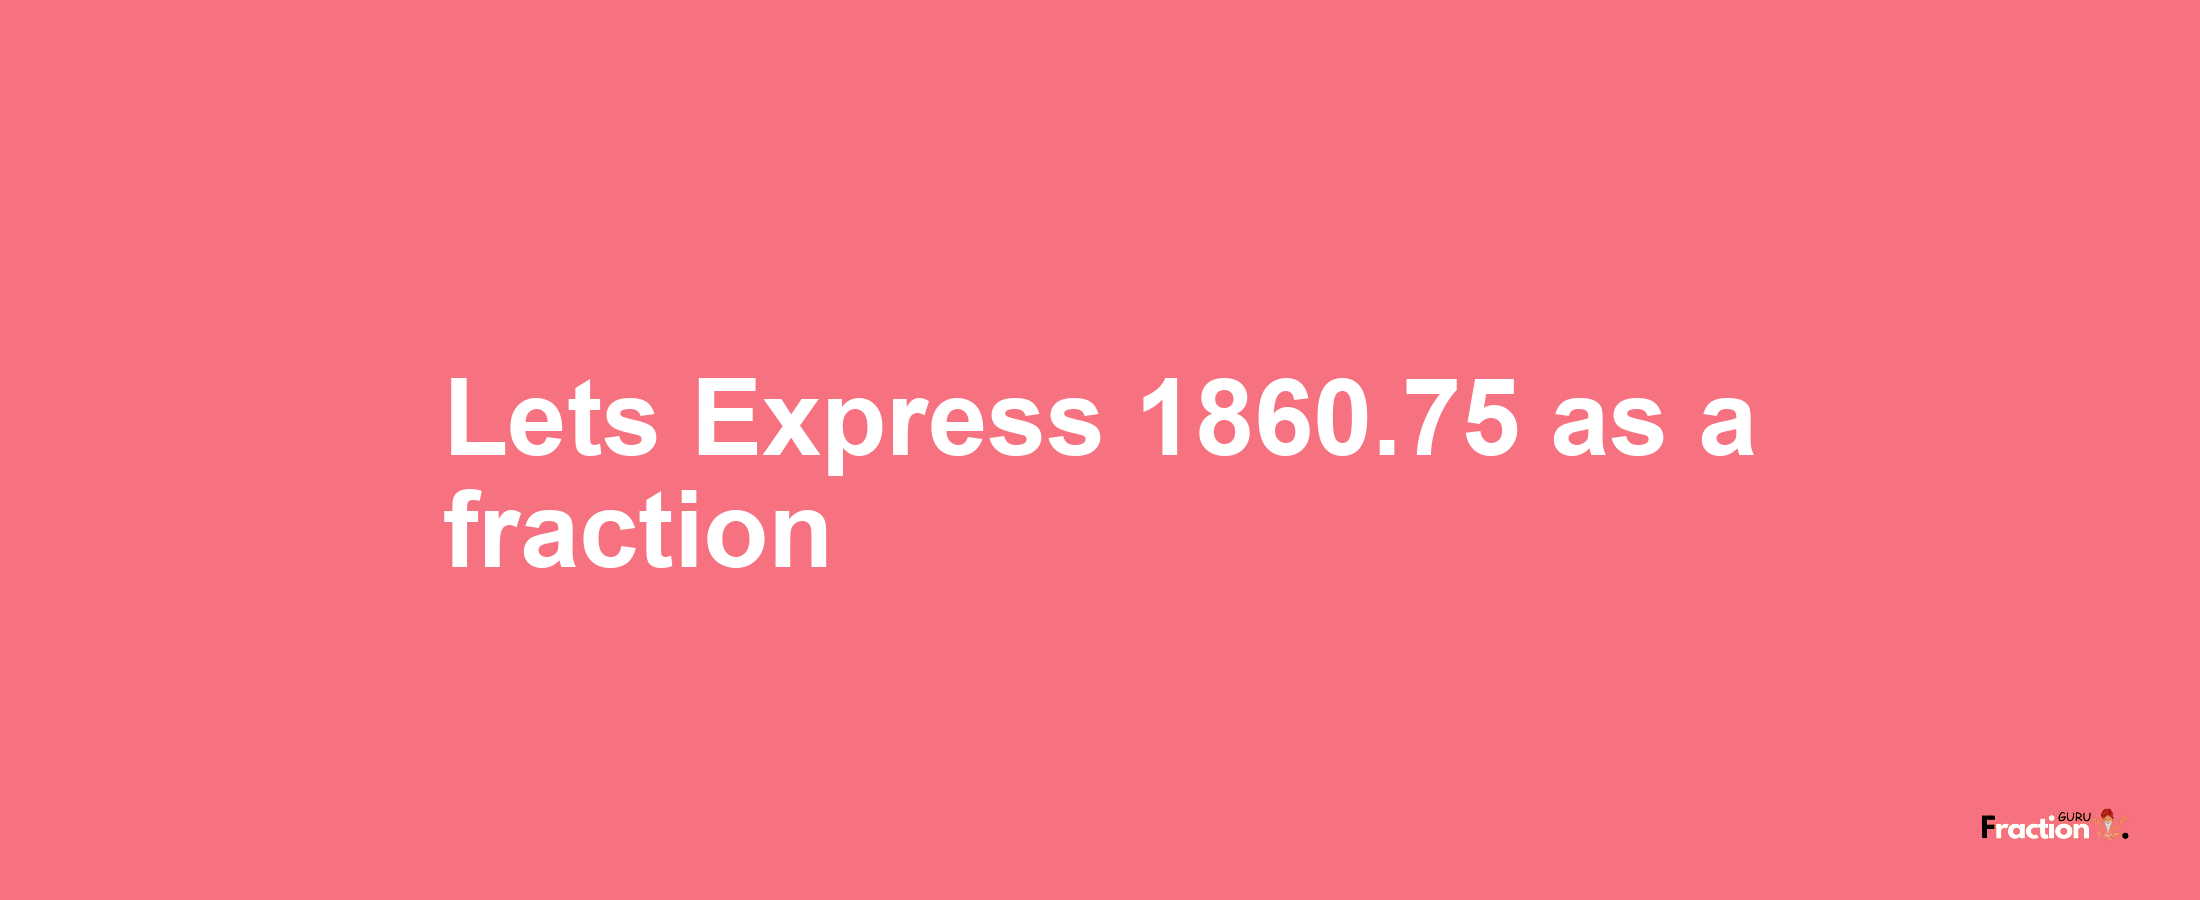 Lets Express 1860.75 as afraction